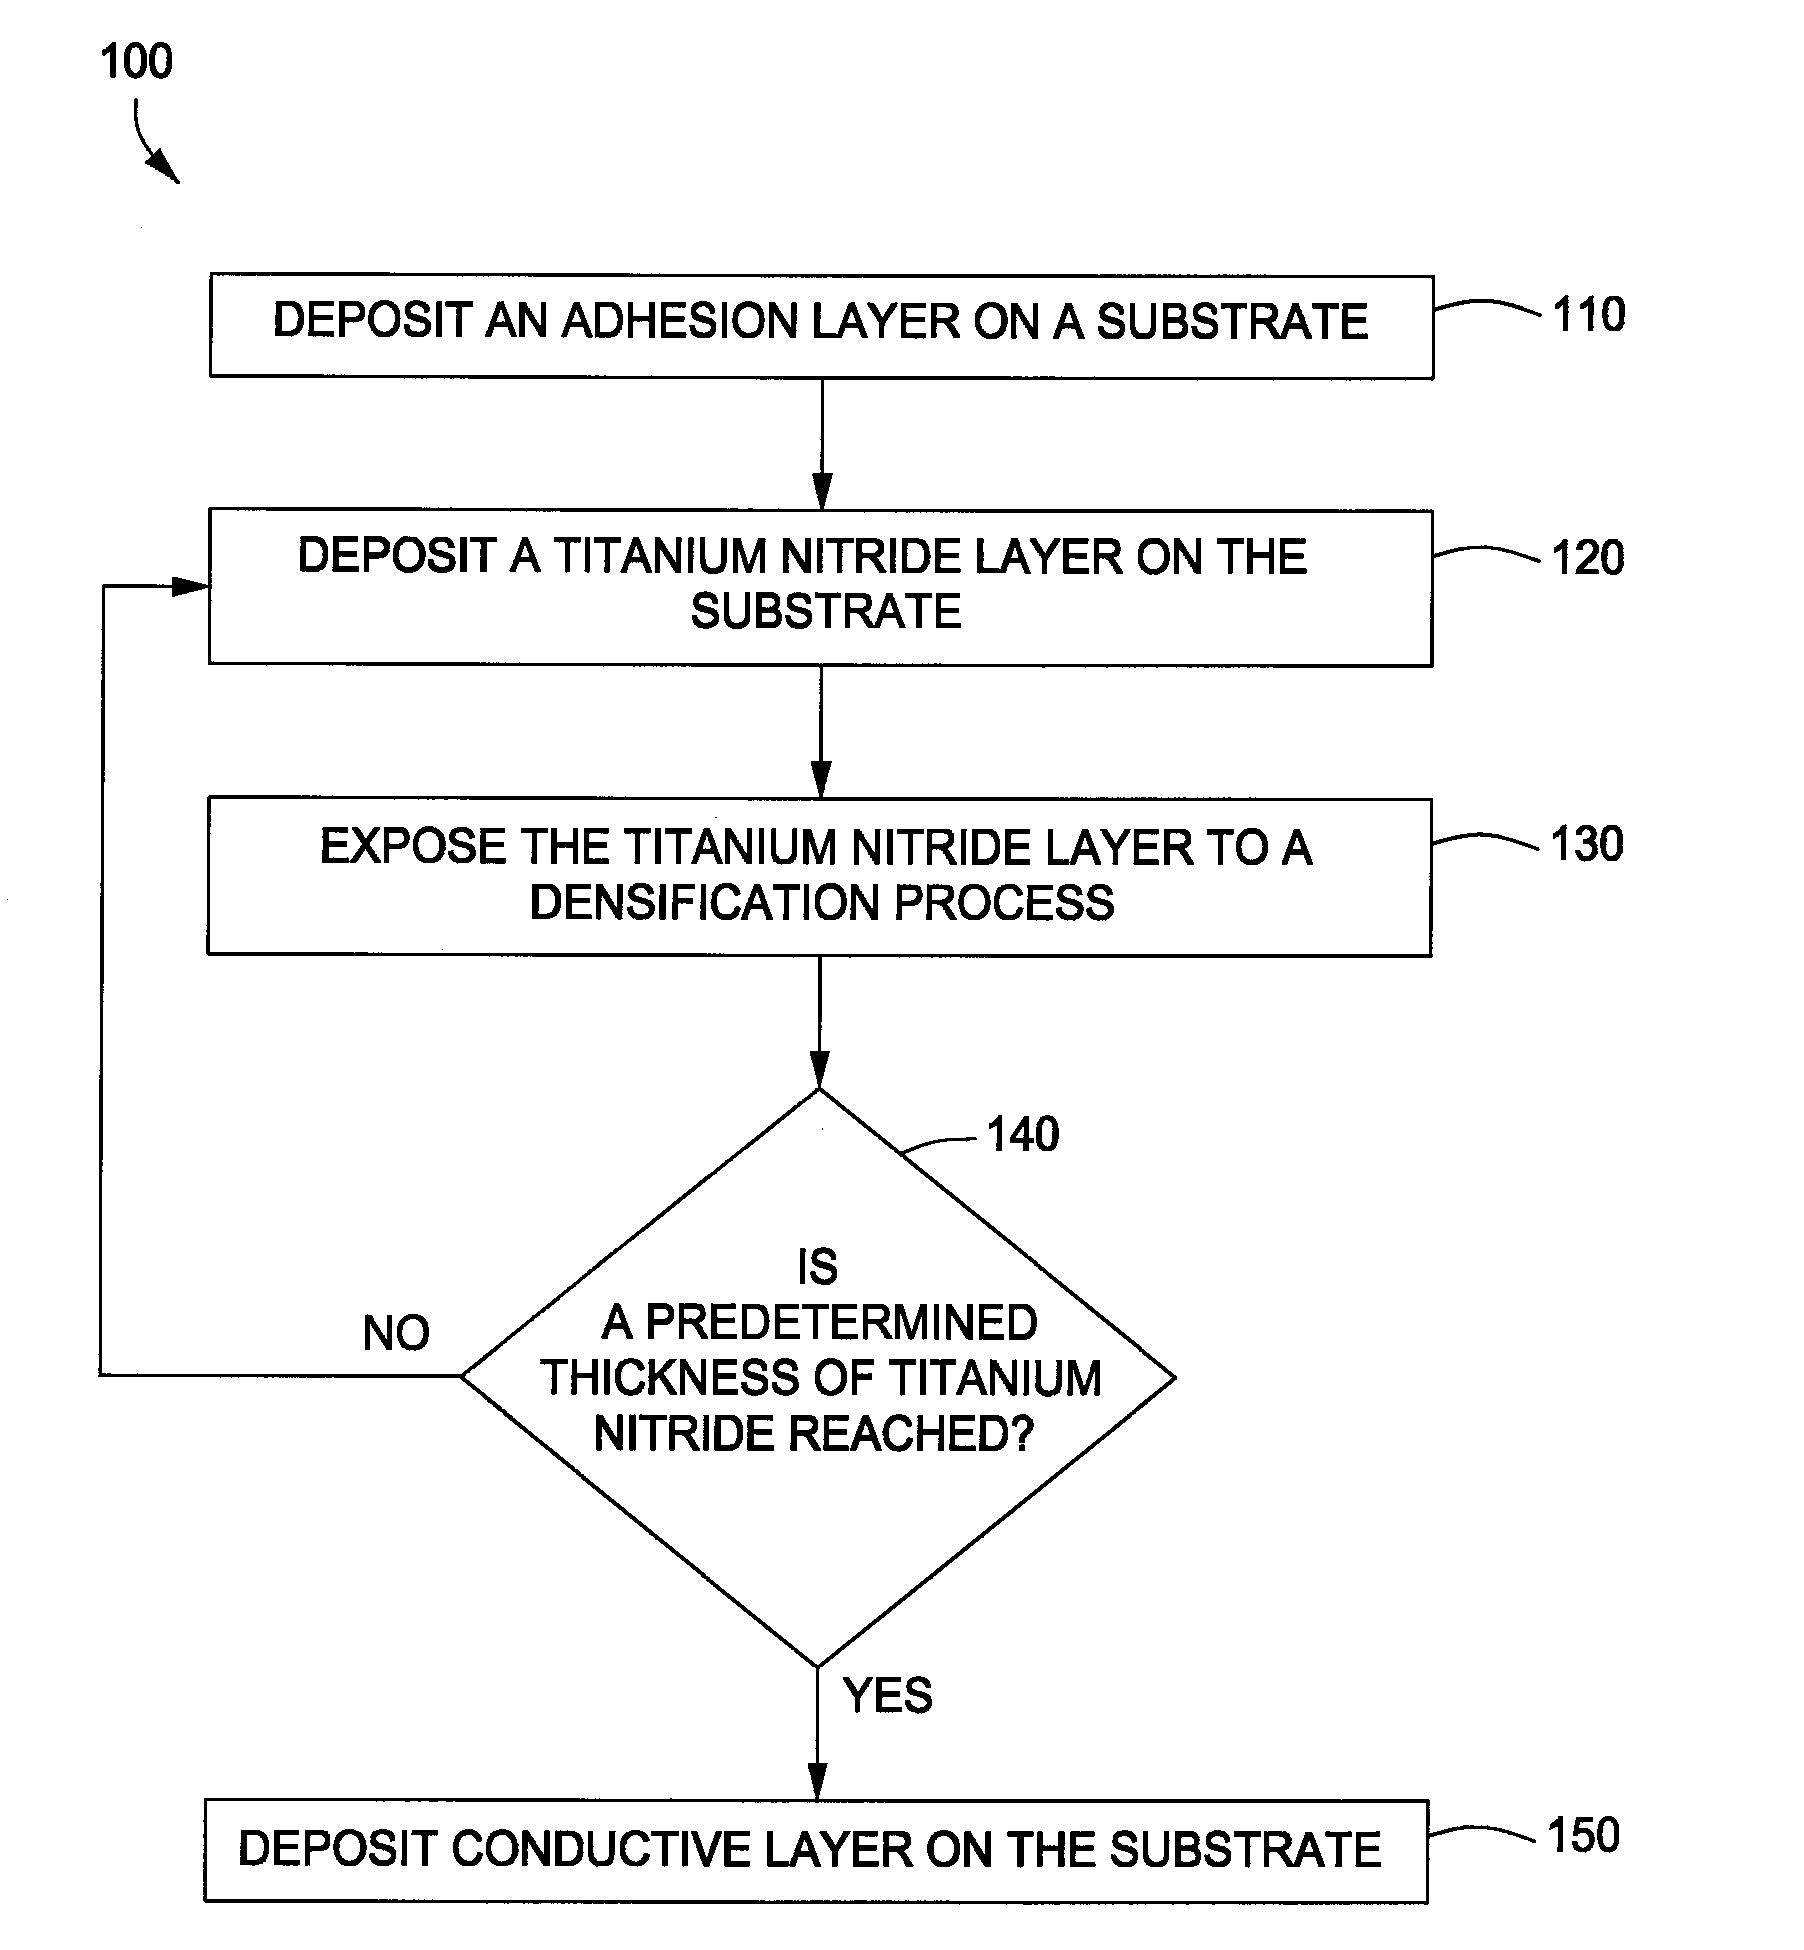 Deposition and densification process for titanium nitride barrier layers